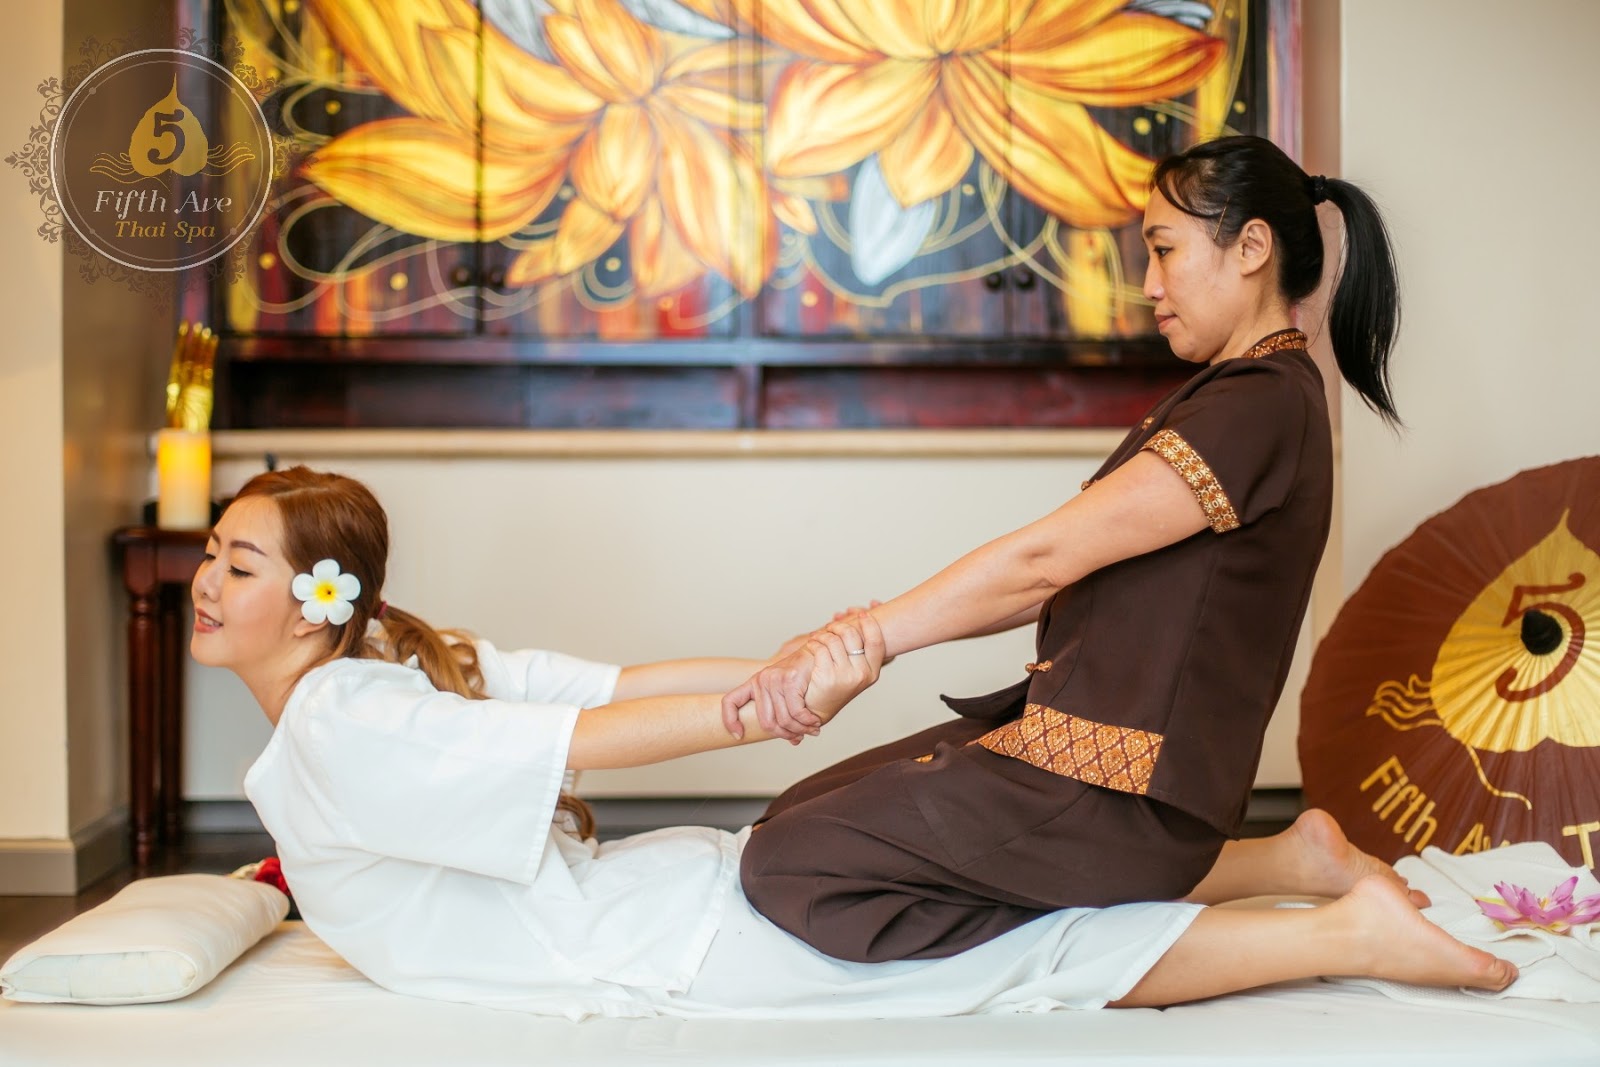 Exprience Thai Massage In New York Fifth Ave Thai Spa 212644 8239